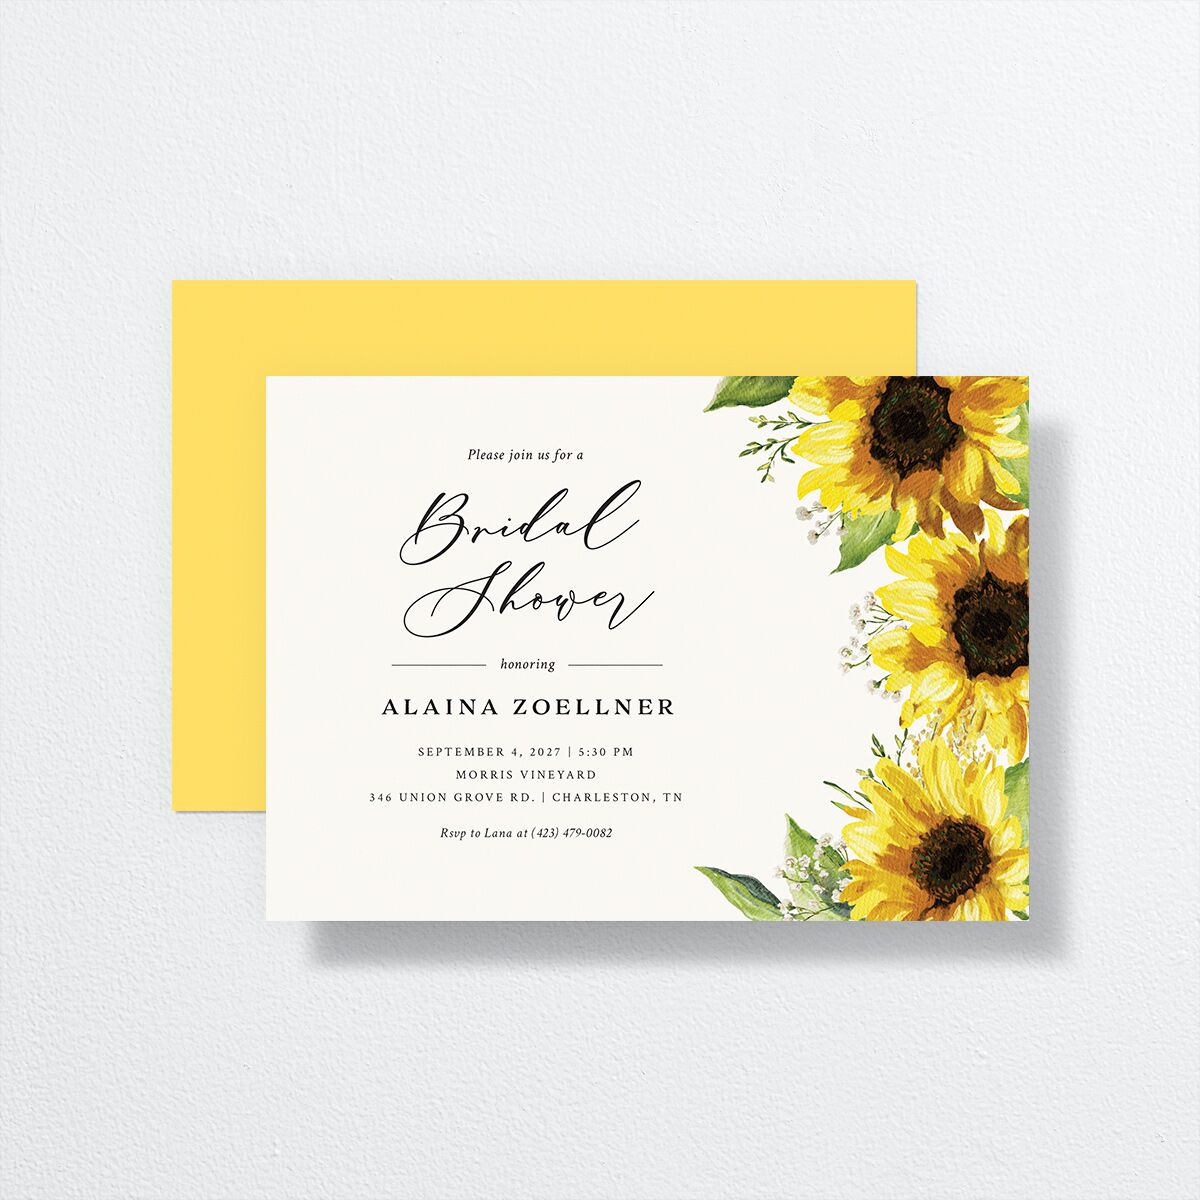 Rustic Sunflower Bridal Shower Invitations front-and-back in yellow